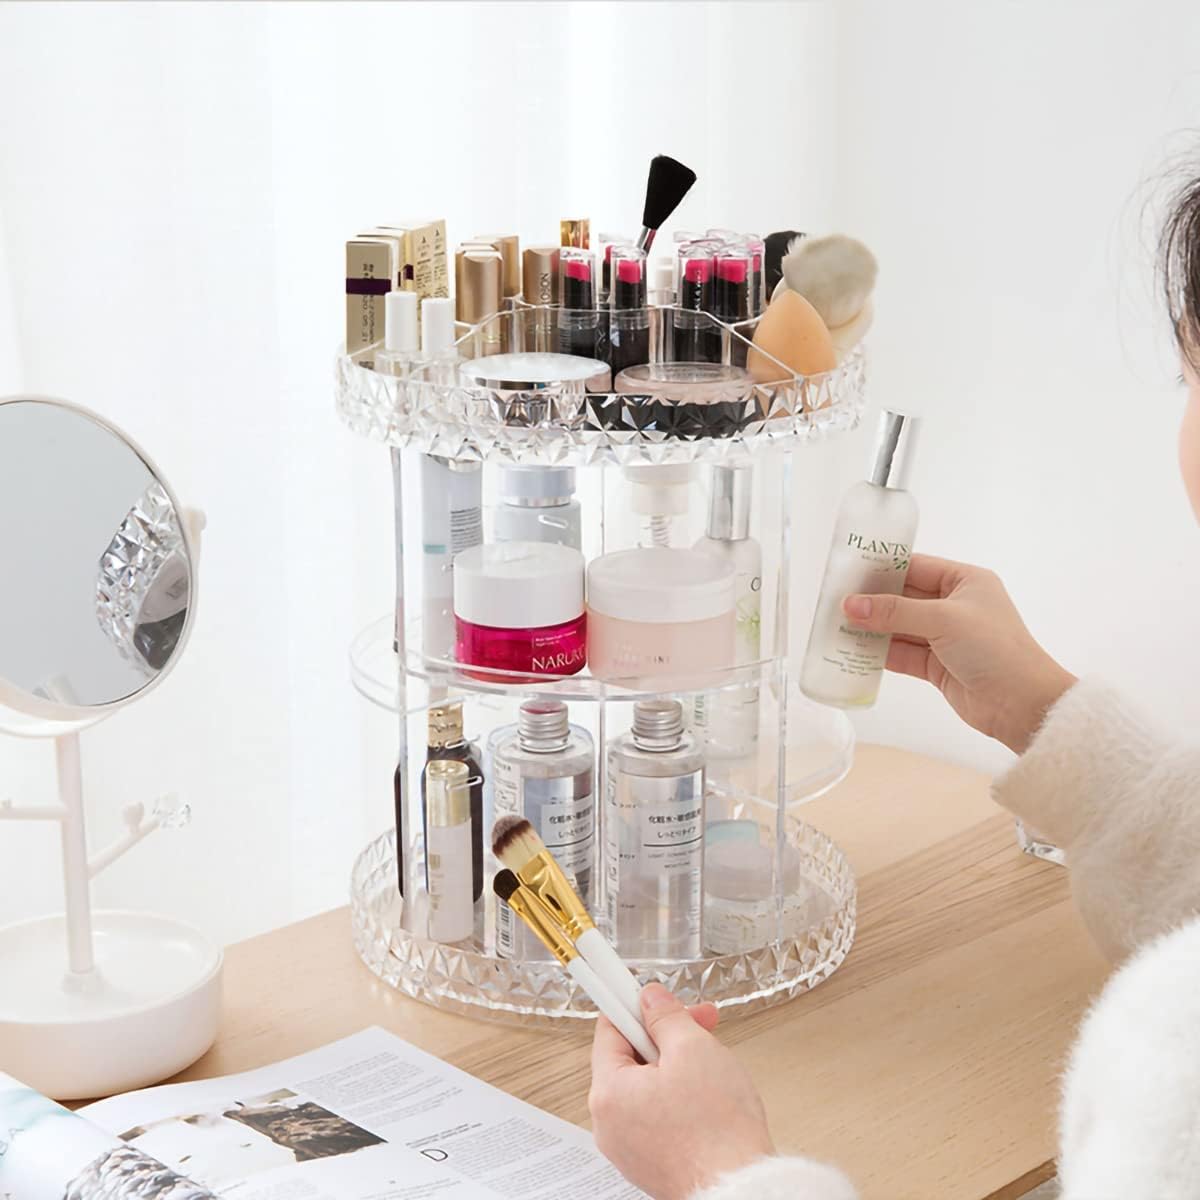 VIO 360°Rotating Cosmetic Makeup Storage Holder Organizer Adjustable, Storage Display Cases with 6 Layers, Fits Most Cosmetics, Jewelry, Makeup Brushes, Lipsticks